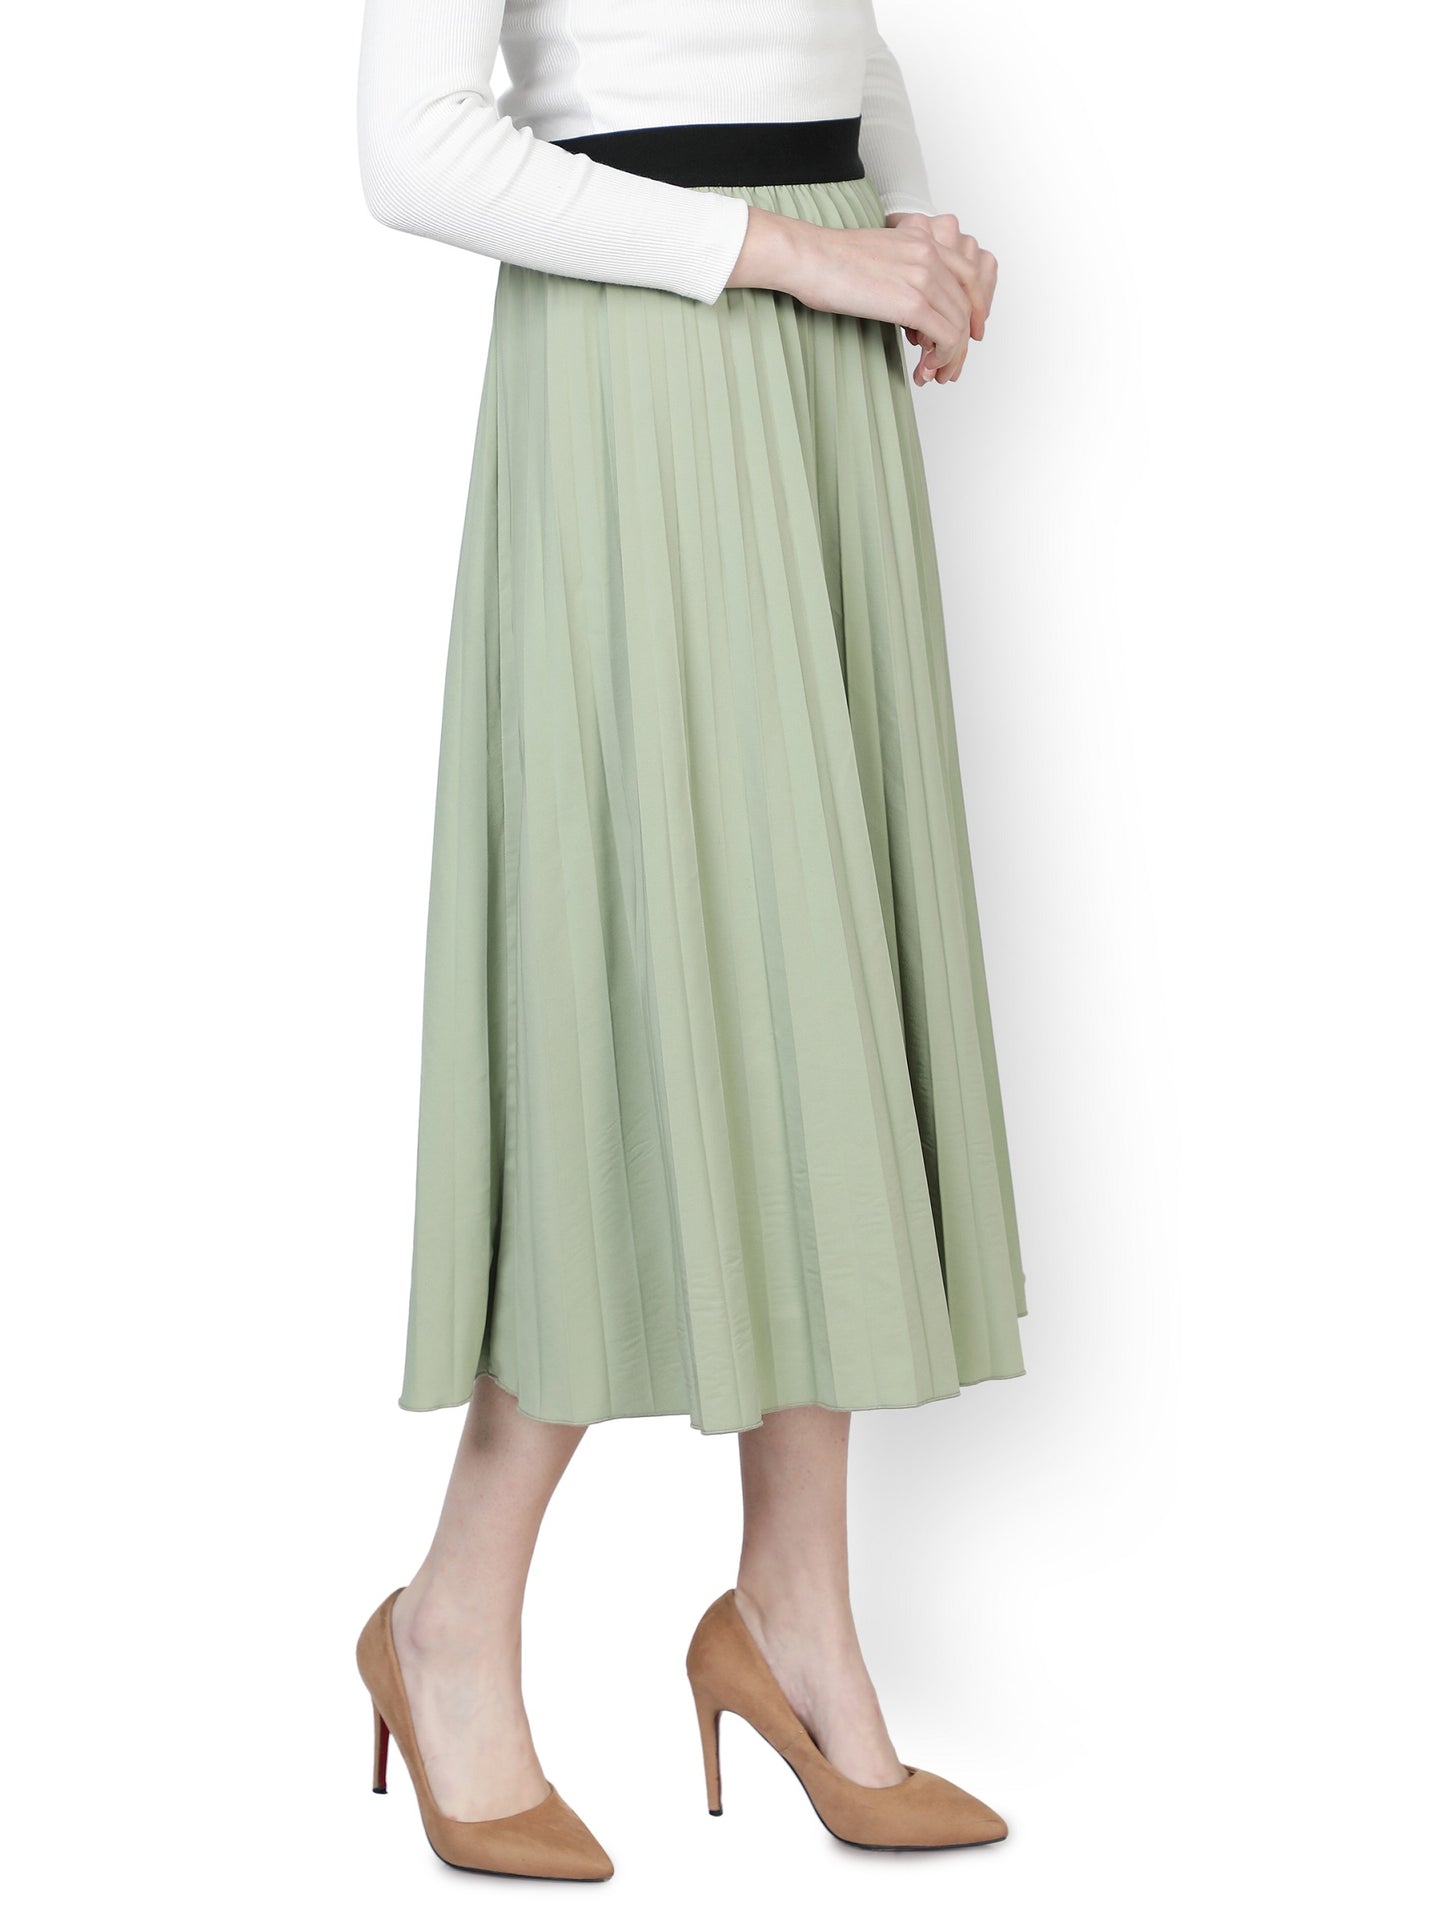 NUEVOSDAMAS Women Western Poly Lycra Solid Skirt | Latest Stylish A- Line Skirt for Summer | Party Casual Knee Length Skirt_ Green